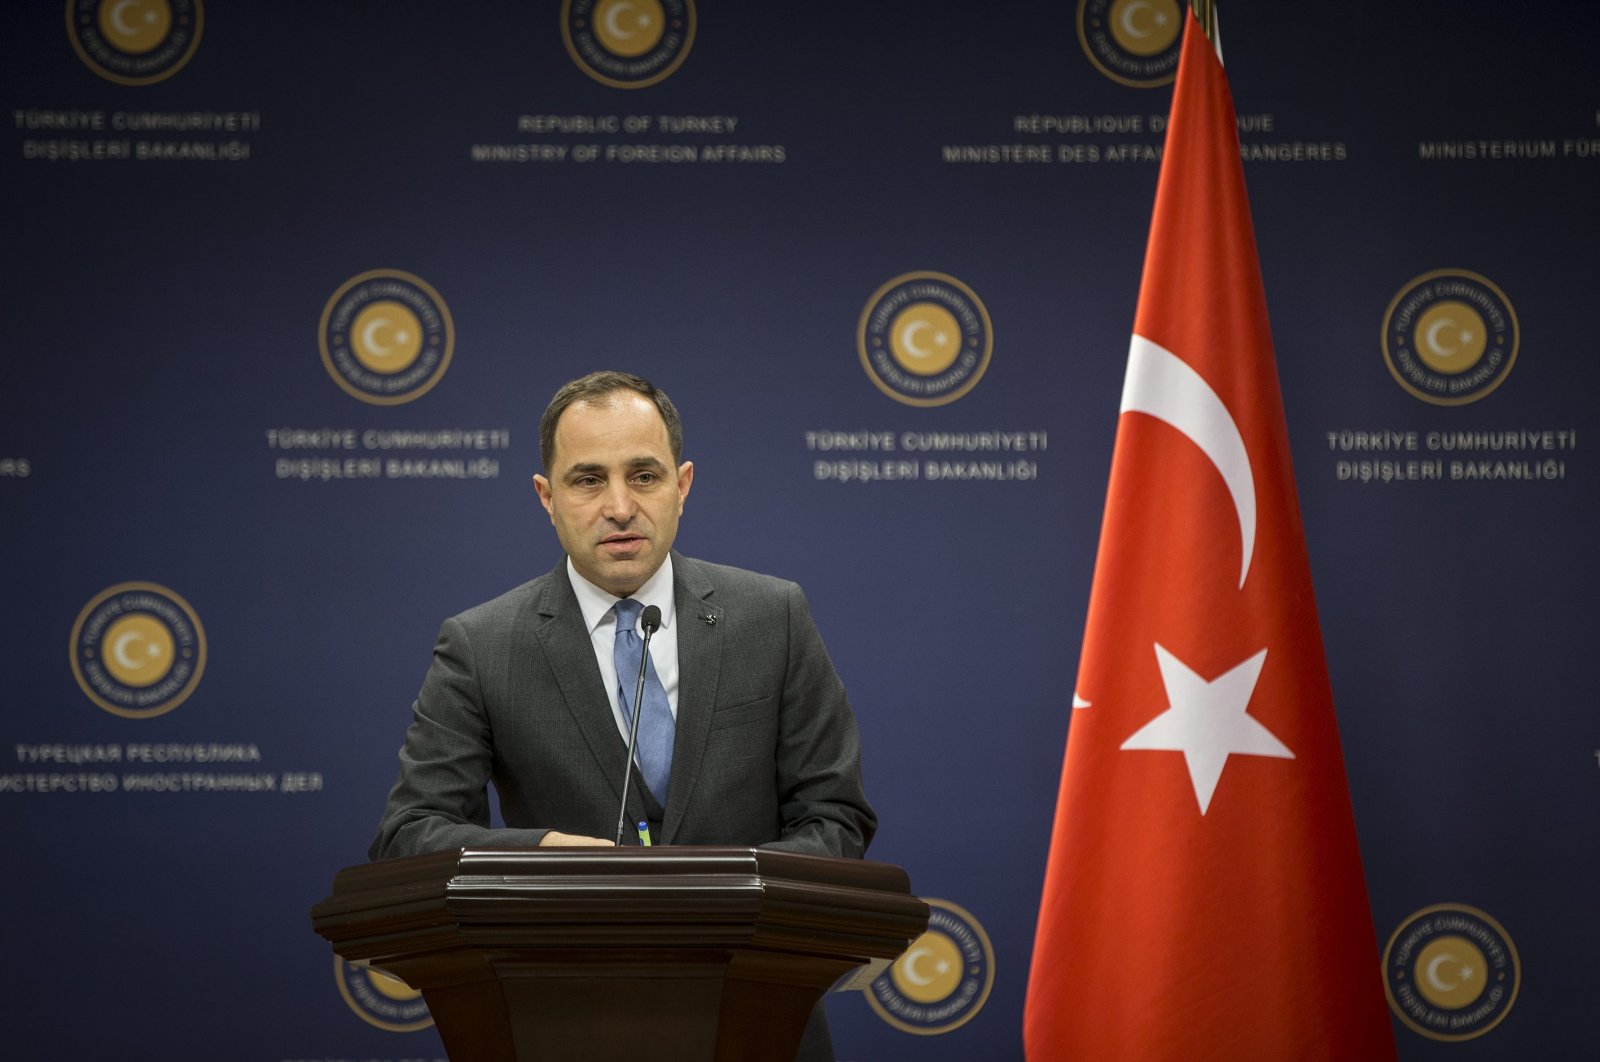 Foreign Ministry Spokesperson Tanju Bilgiç speaks at a news conference in Ankara, Turkey, in this undated file photo. (AA File Photo)